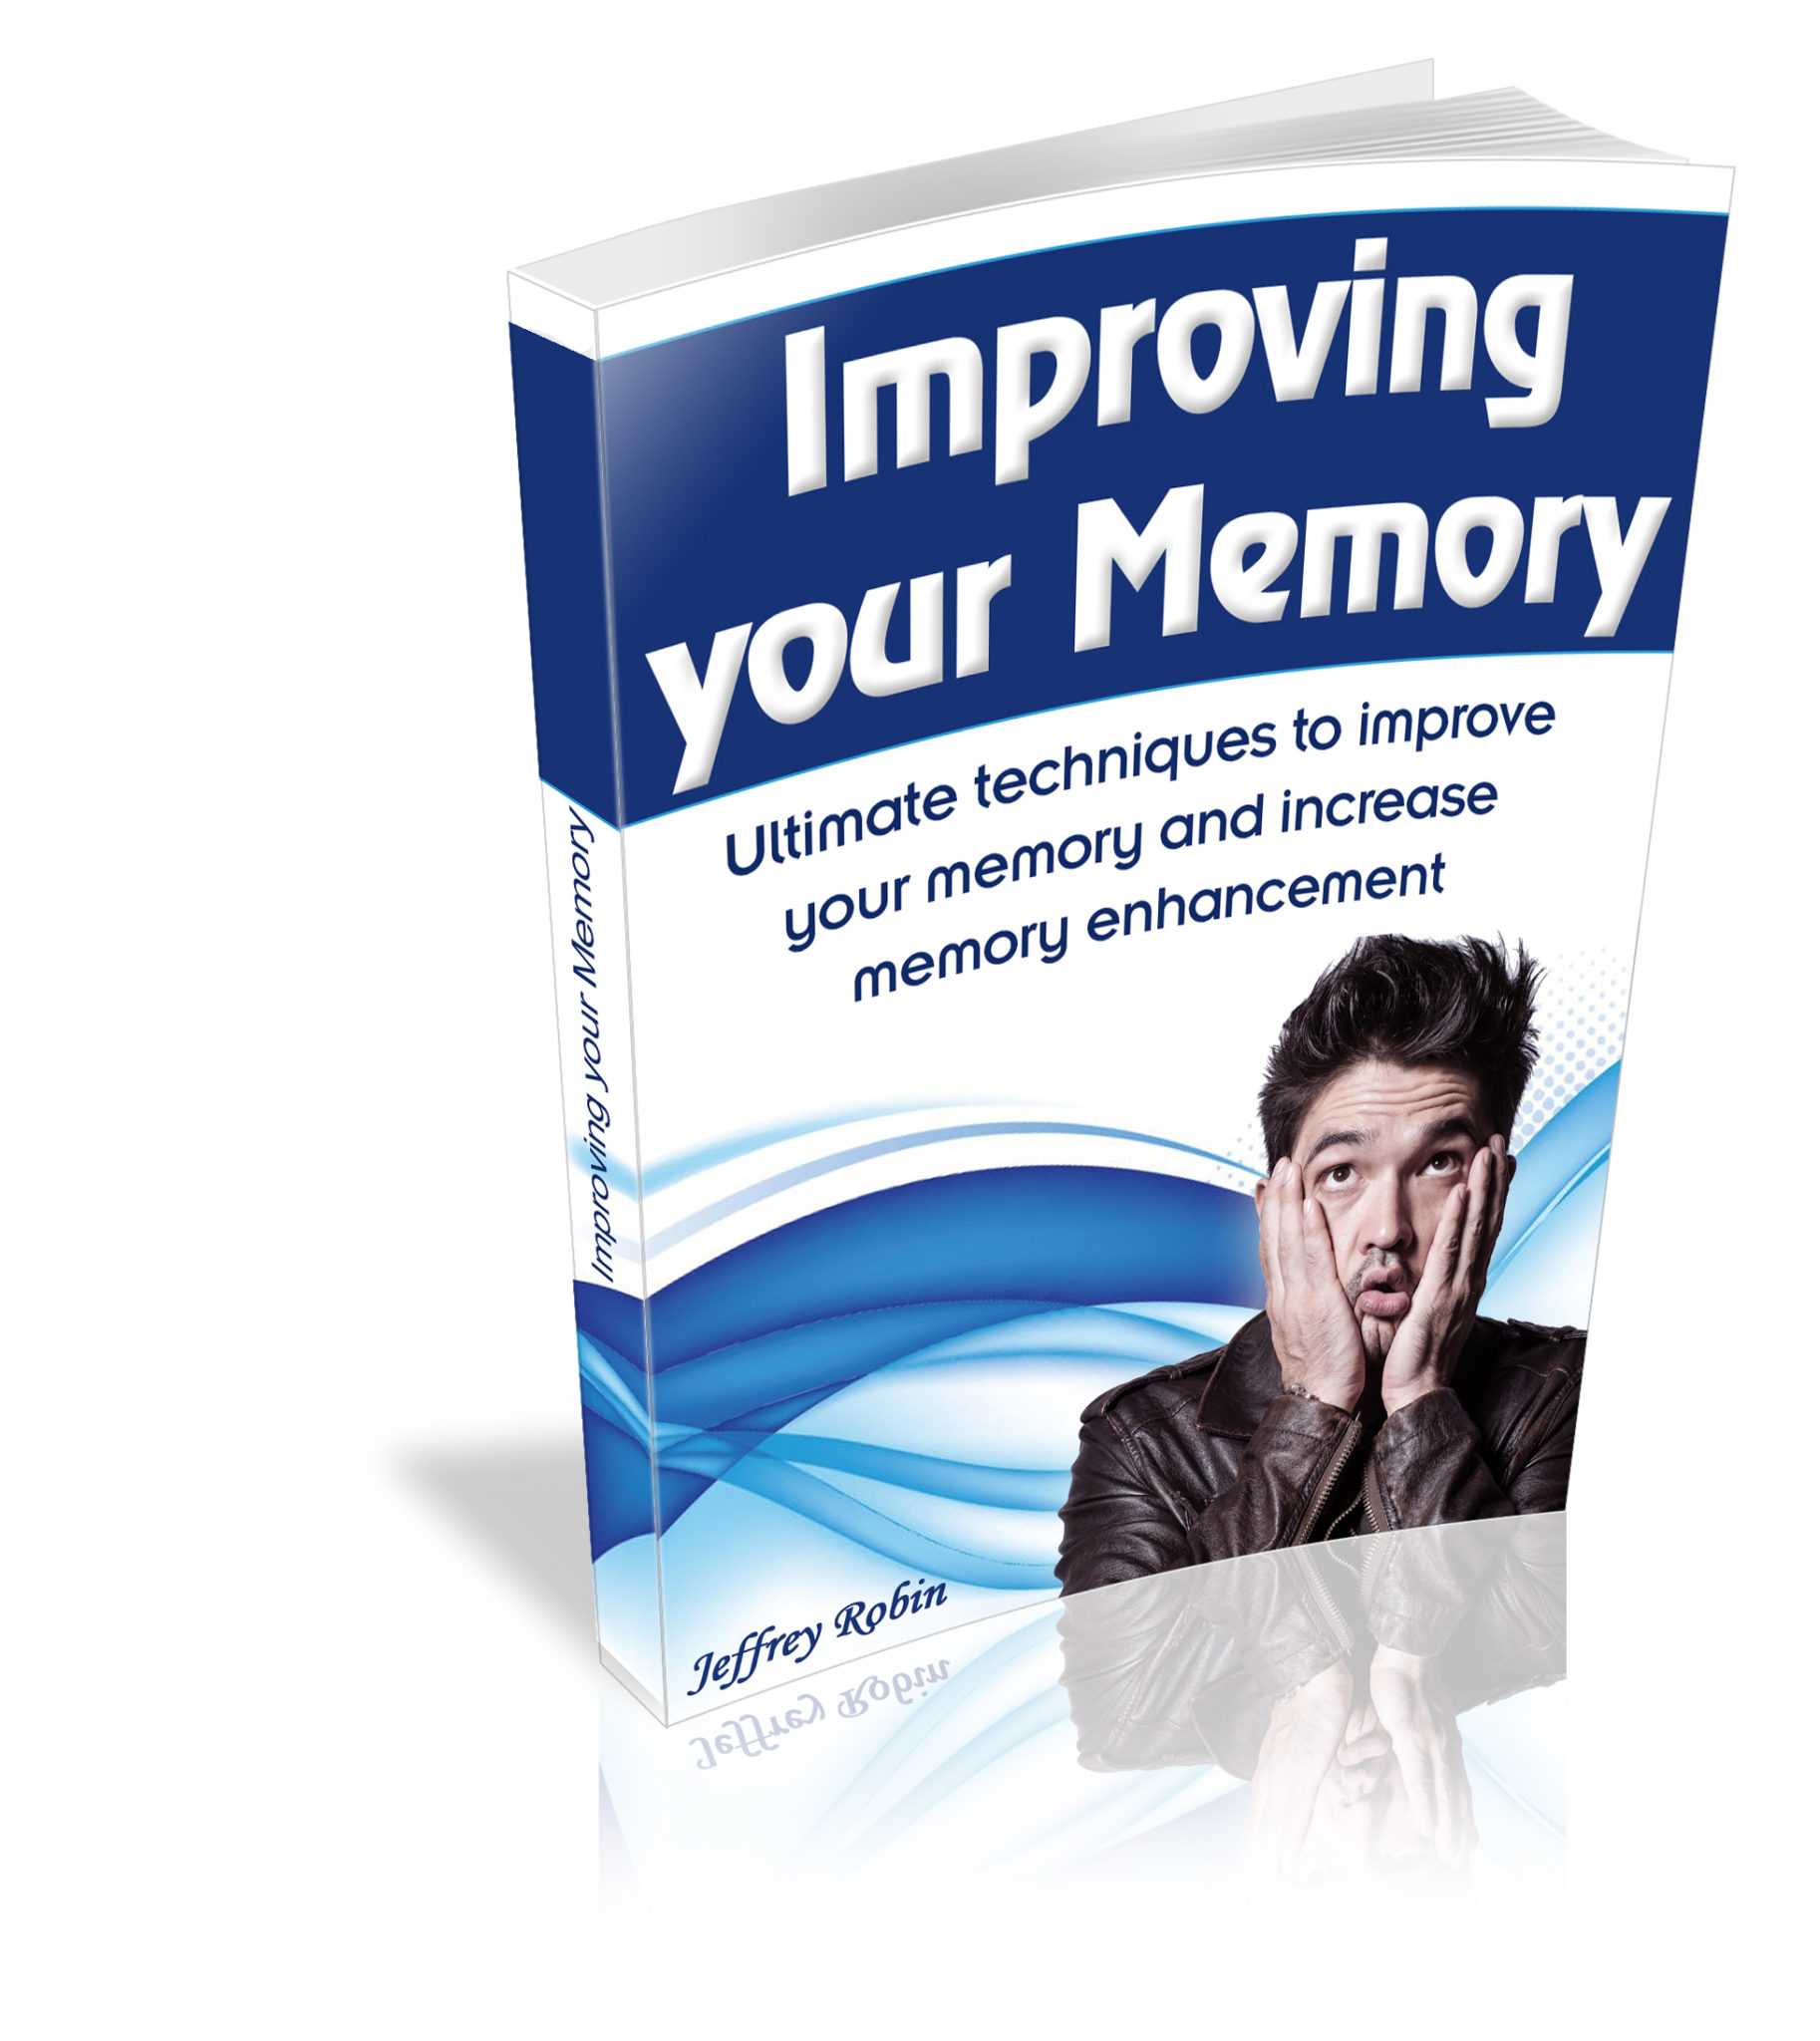 FREE: Improving your memory: Ultimate techniques to improve your memory and increase memory enhancement by Jeffrey Robin